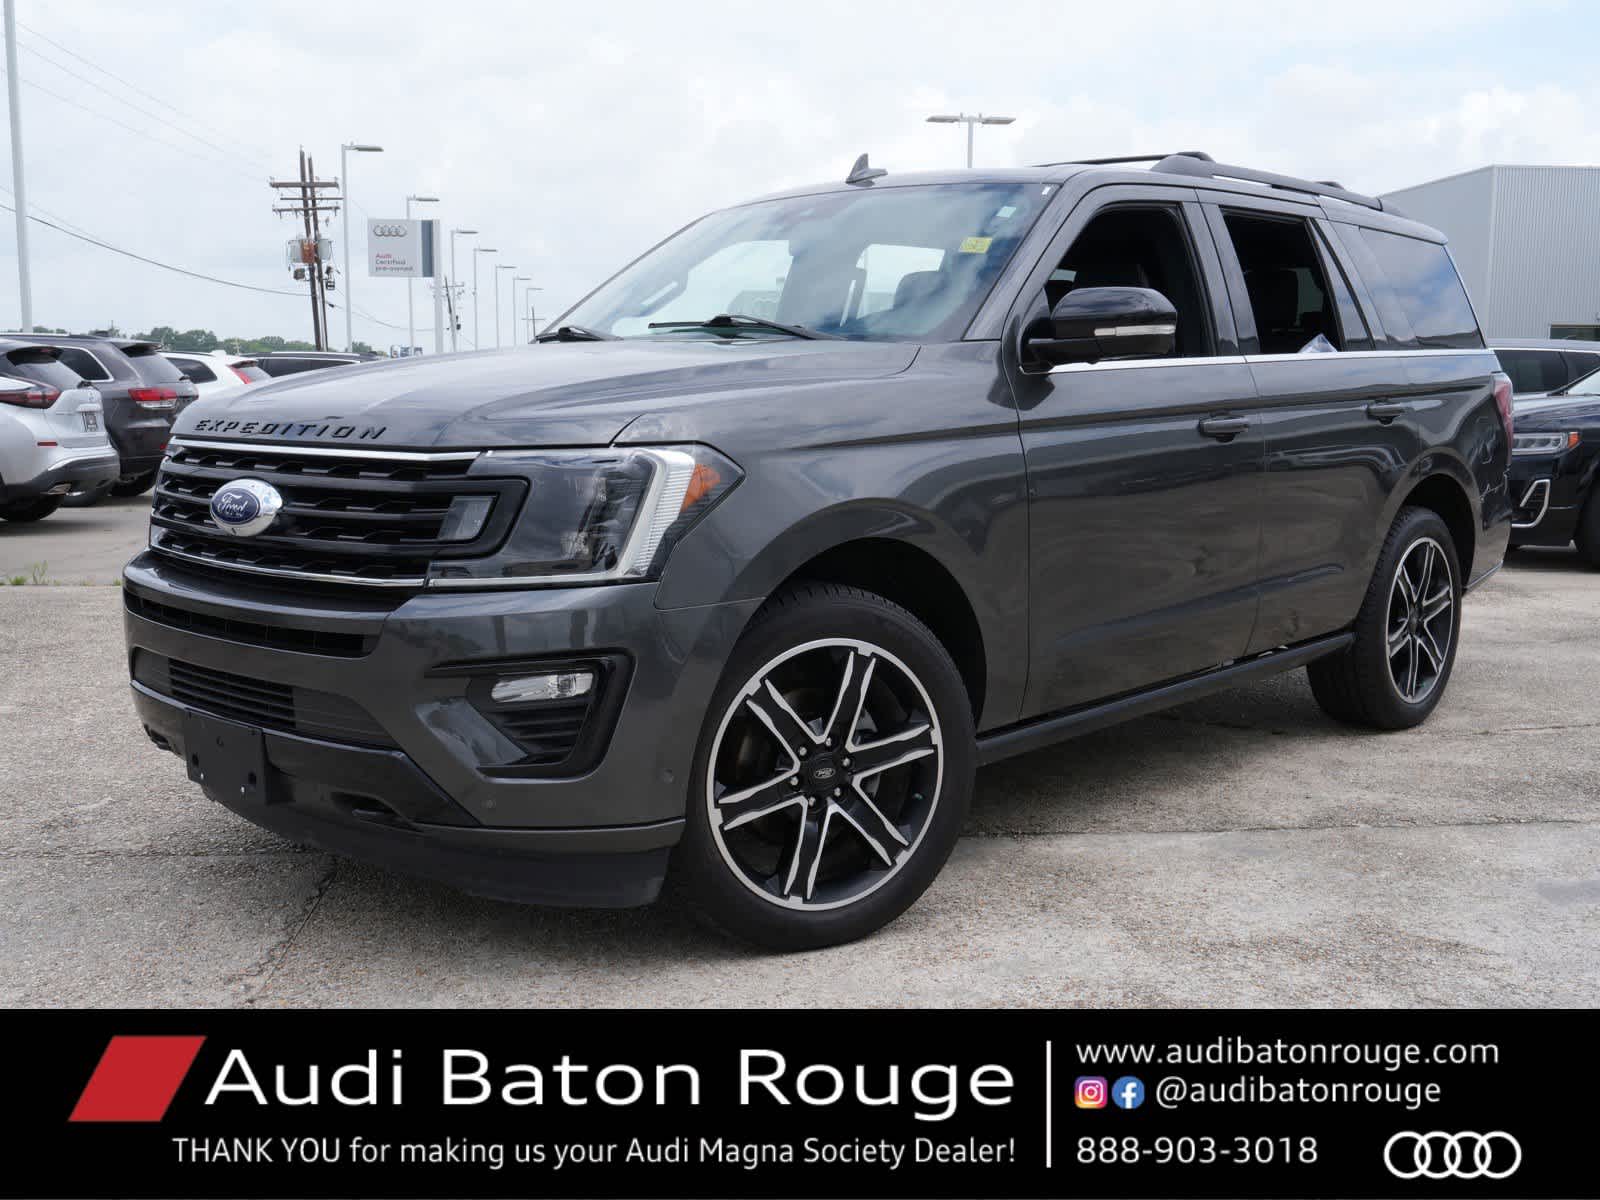 2021 Ford Expedition Baton Rouge LA